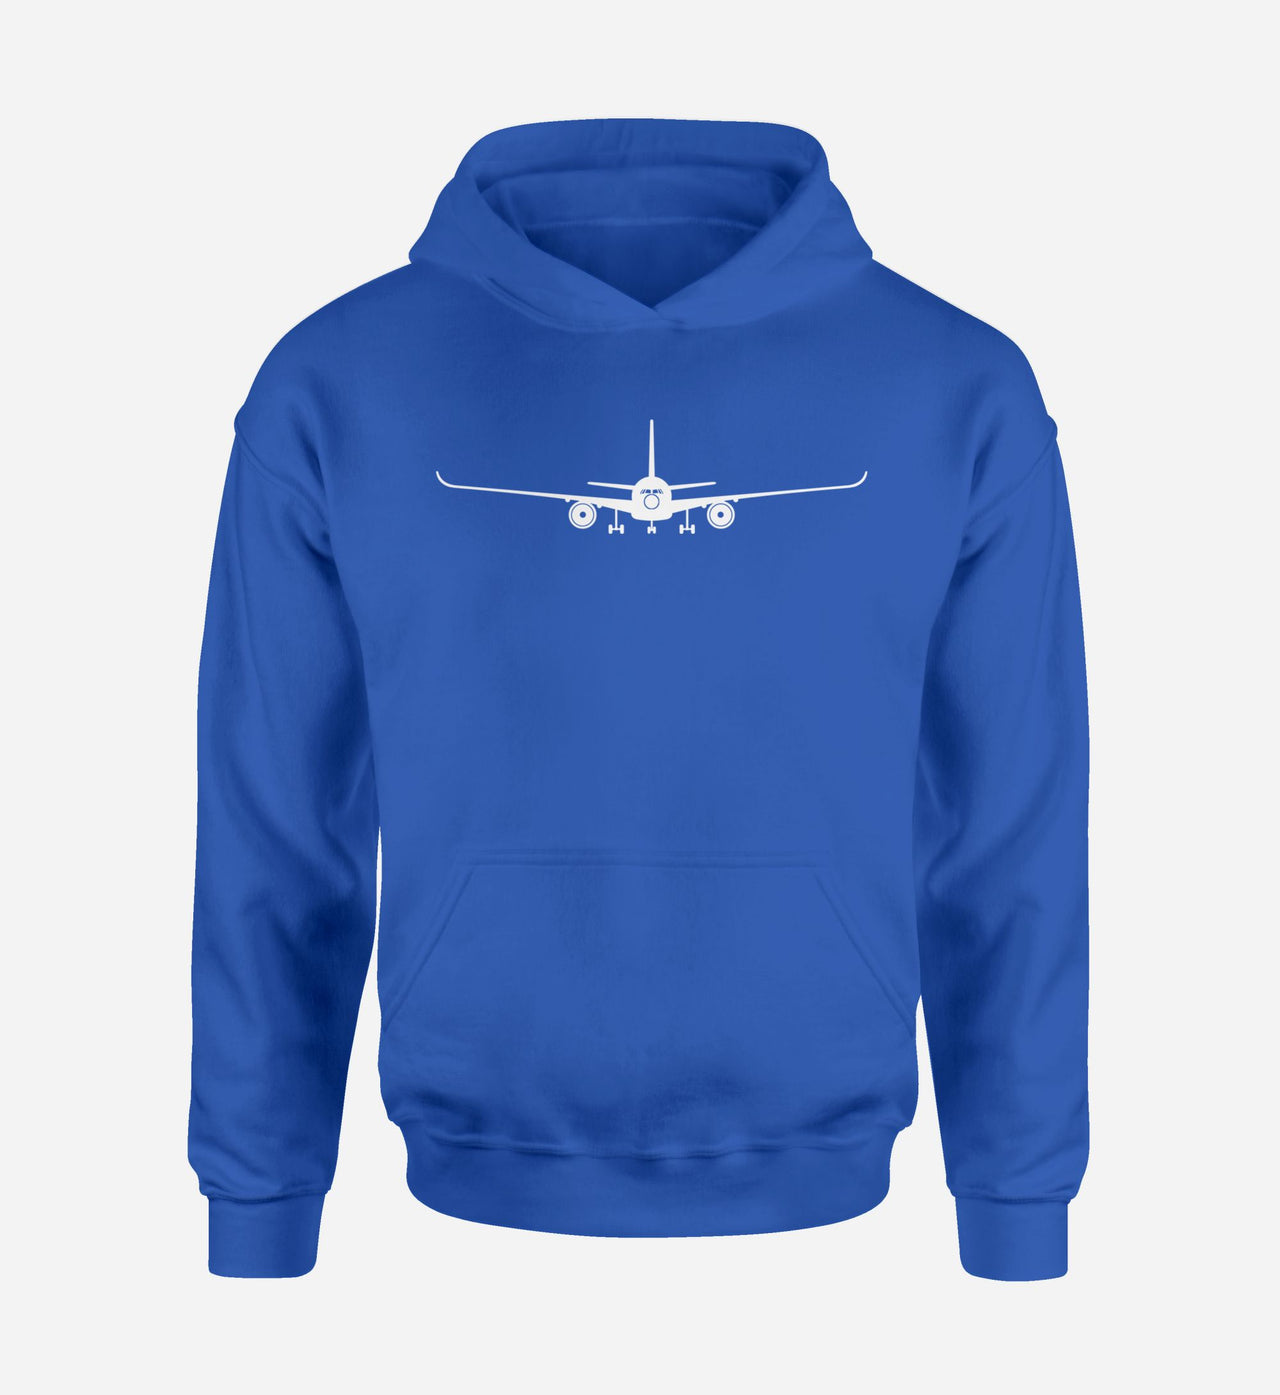 Airbus A350 Silhouette Designed Hoodies